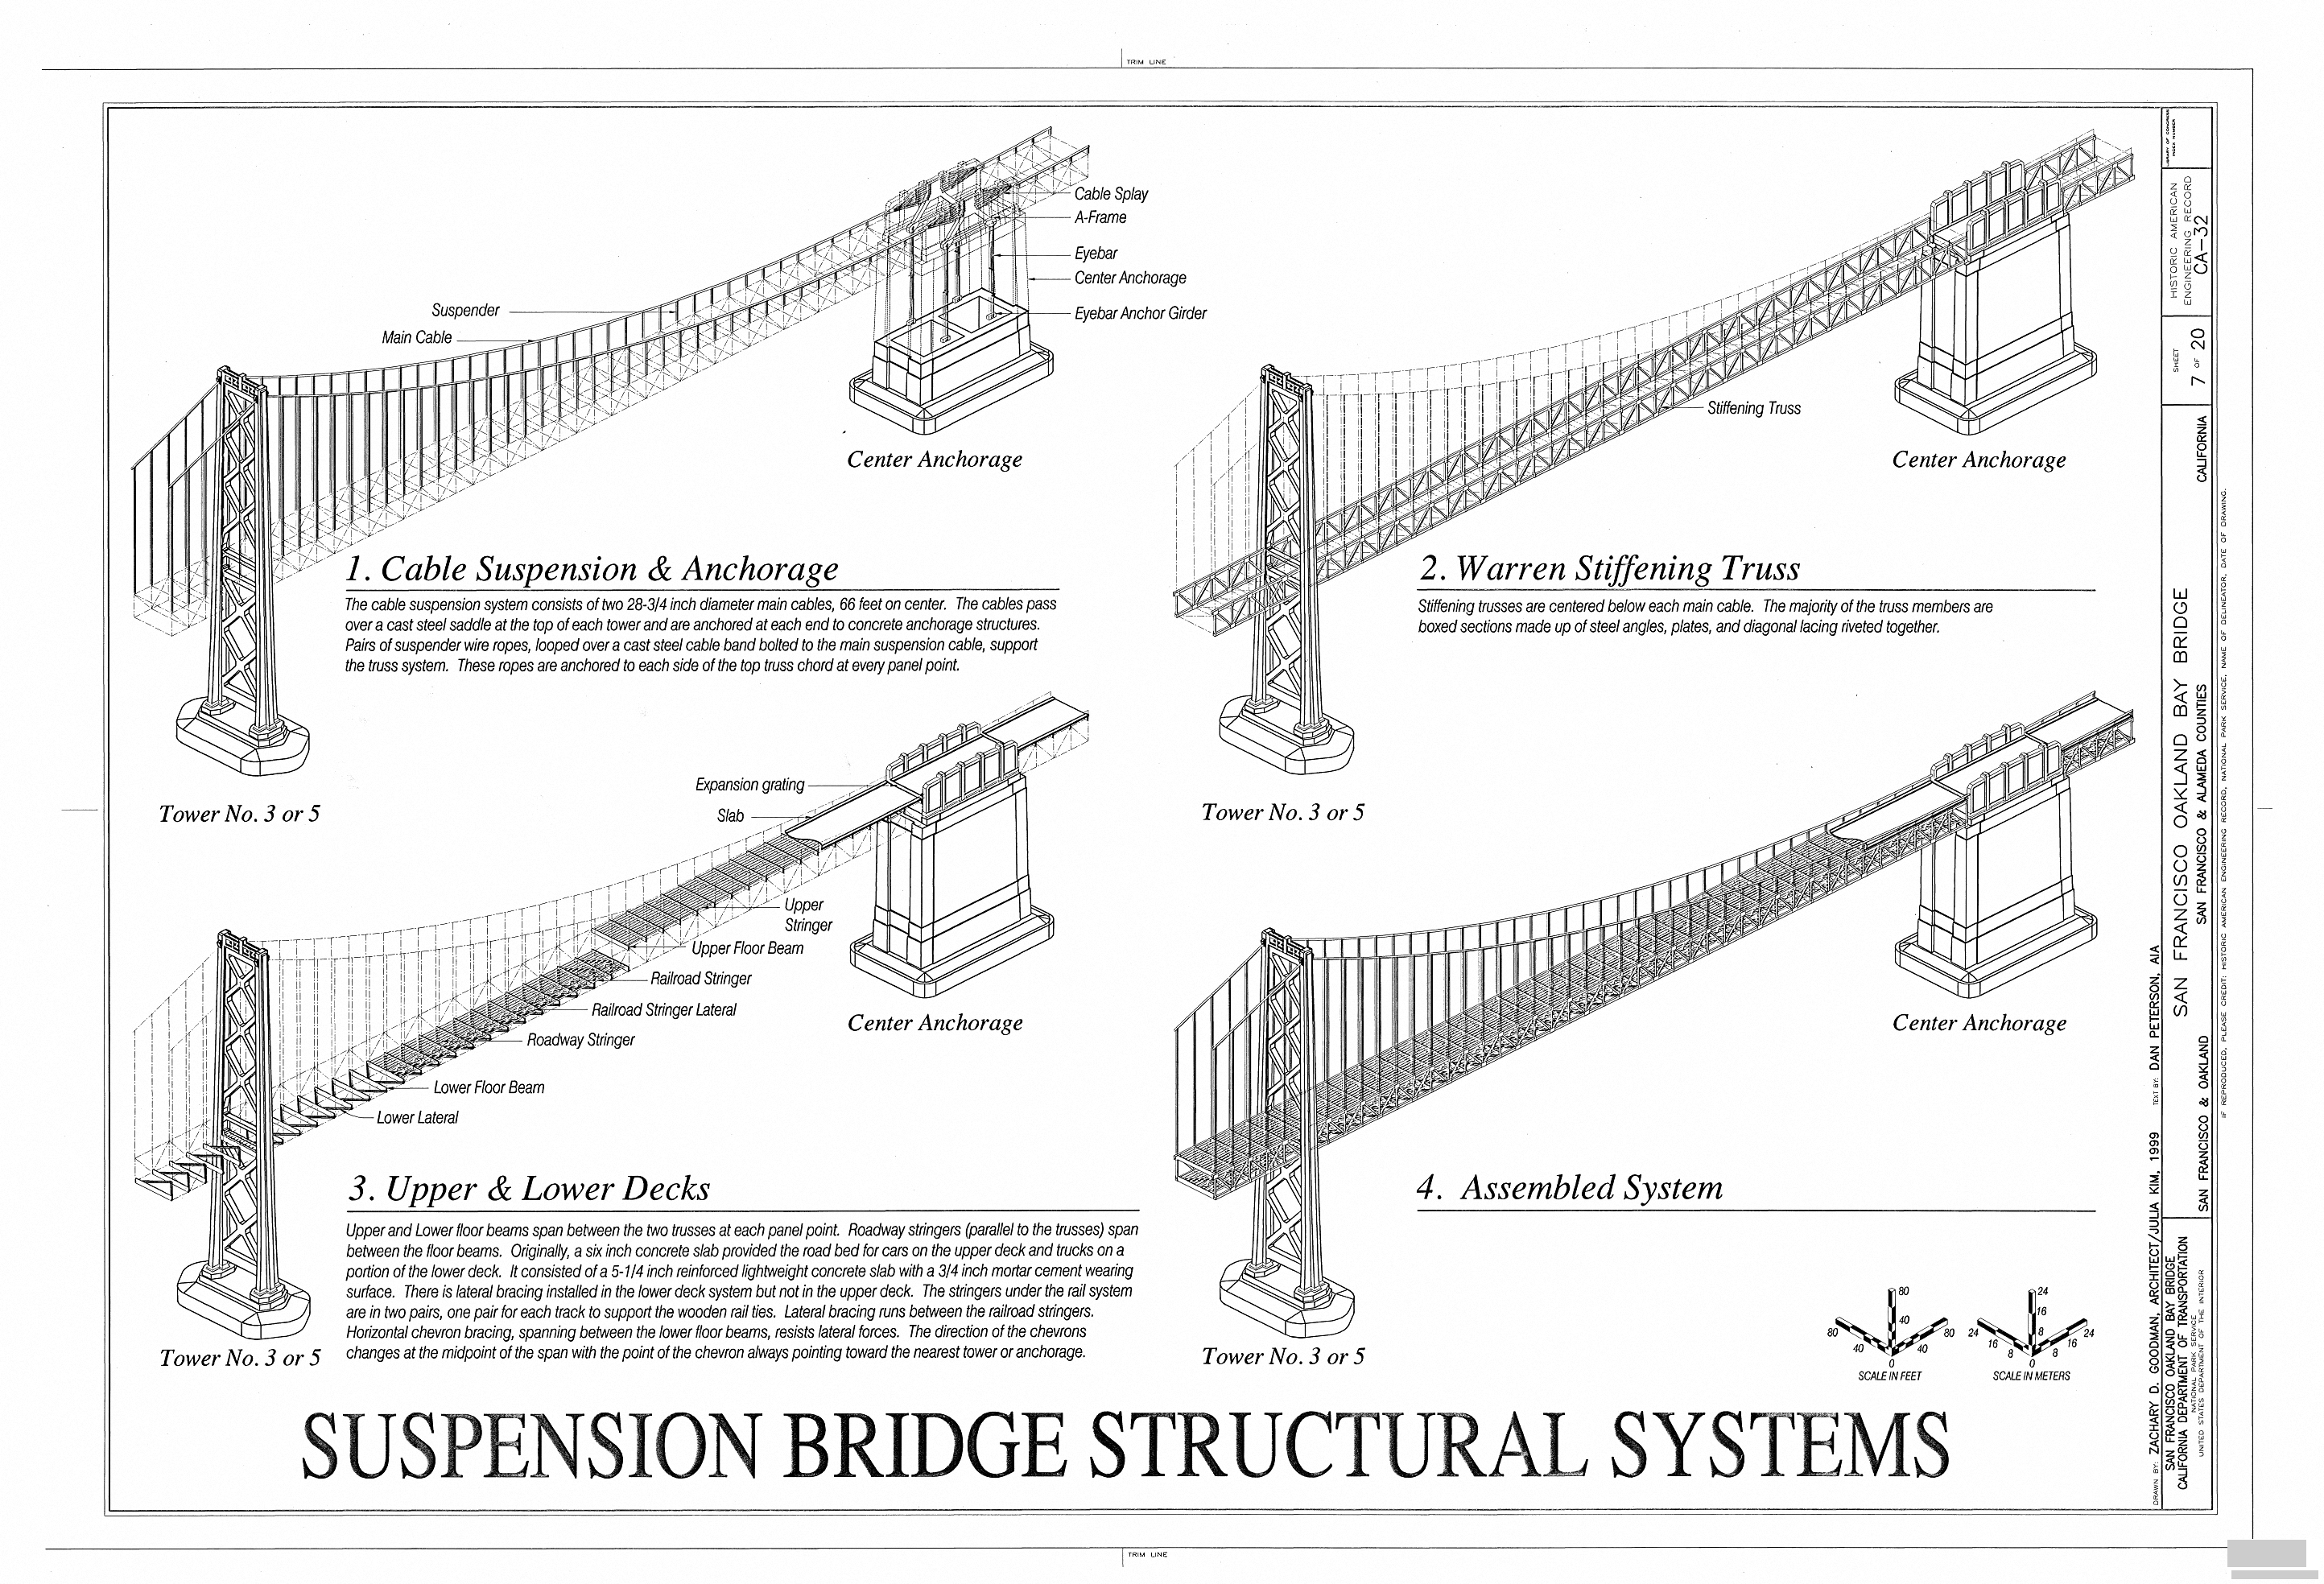 Suspension_Bridge_Structural_Systems-_Cable_Suspension_and_Anchorage;_Warren_Sti.png